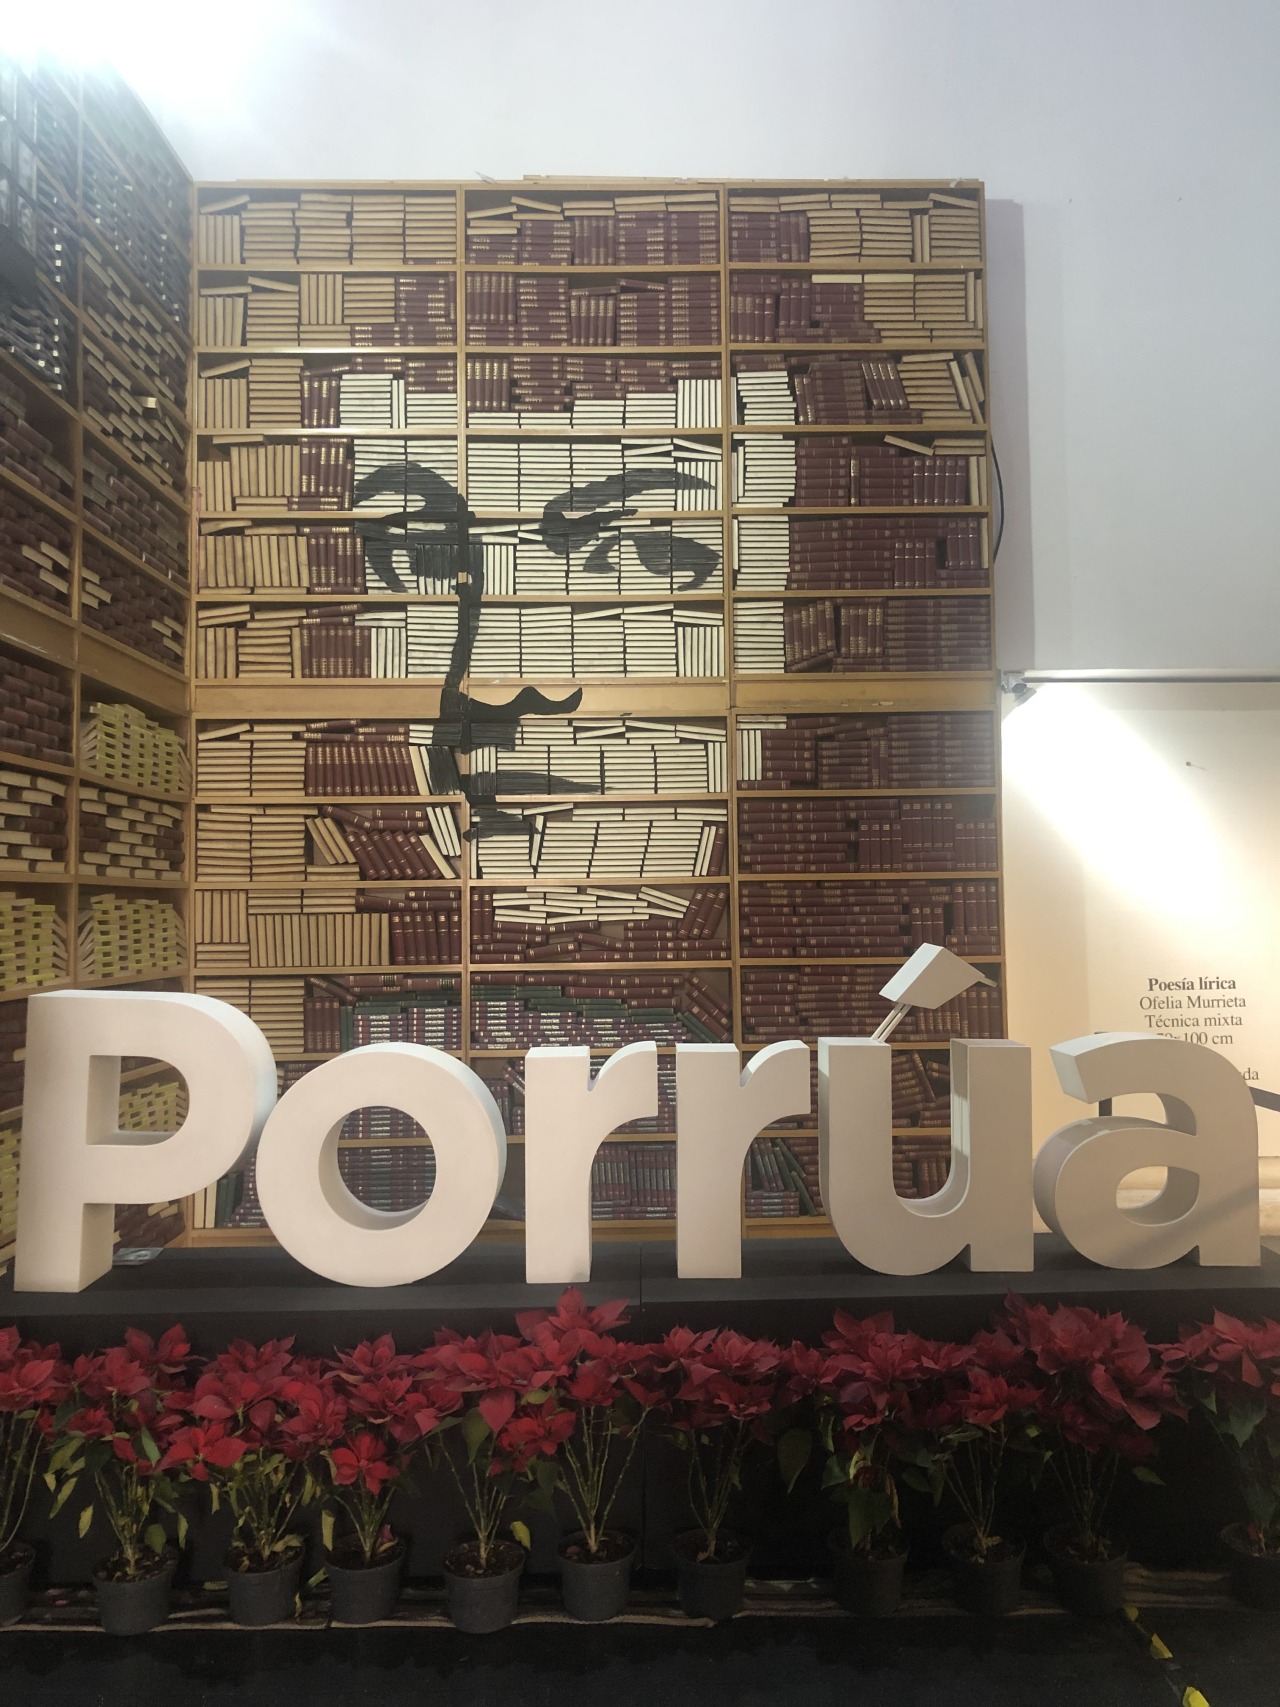 Booksellers on VacationJane sends this from Mexico City from Porrua (Librería Hermanos Porrúa has over 120 years of history as bookseller and publisher in Mexico). This is all made of books! #booksellers on vacation #book art#bookstore#mexico city#porrua #bookstores around the world